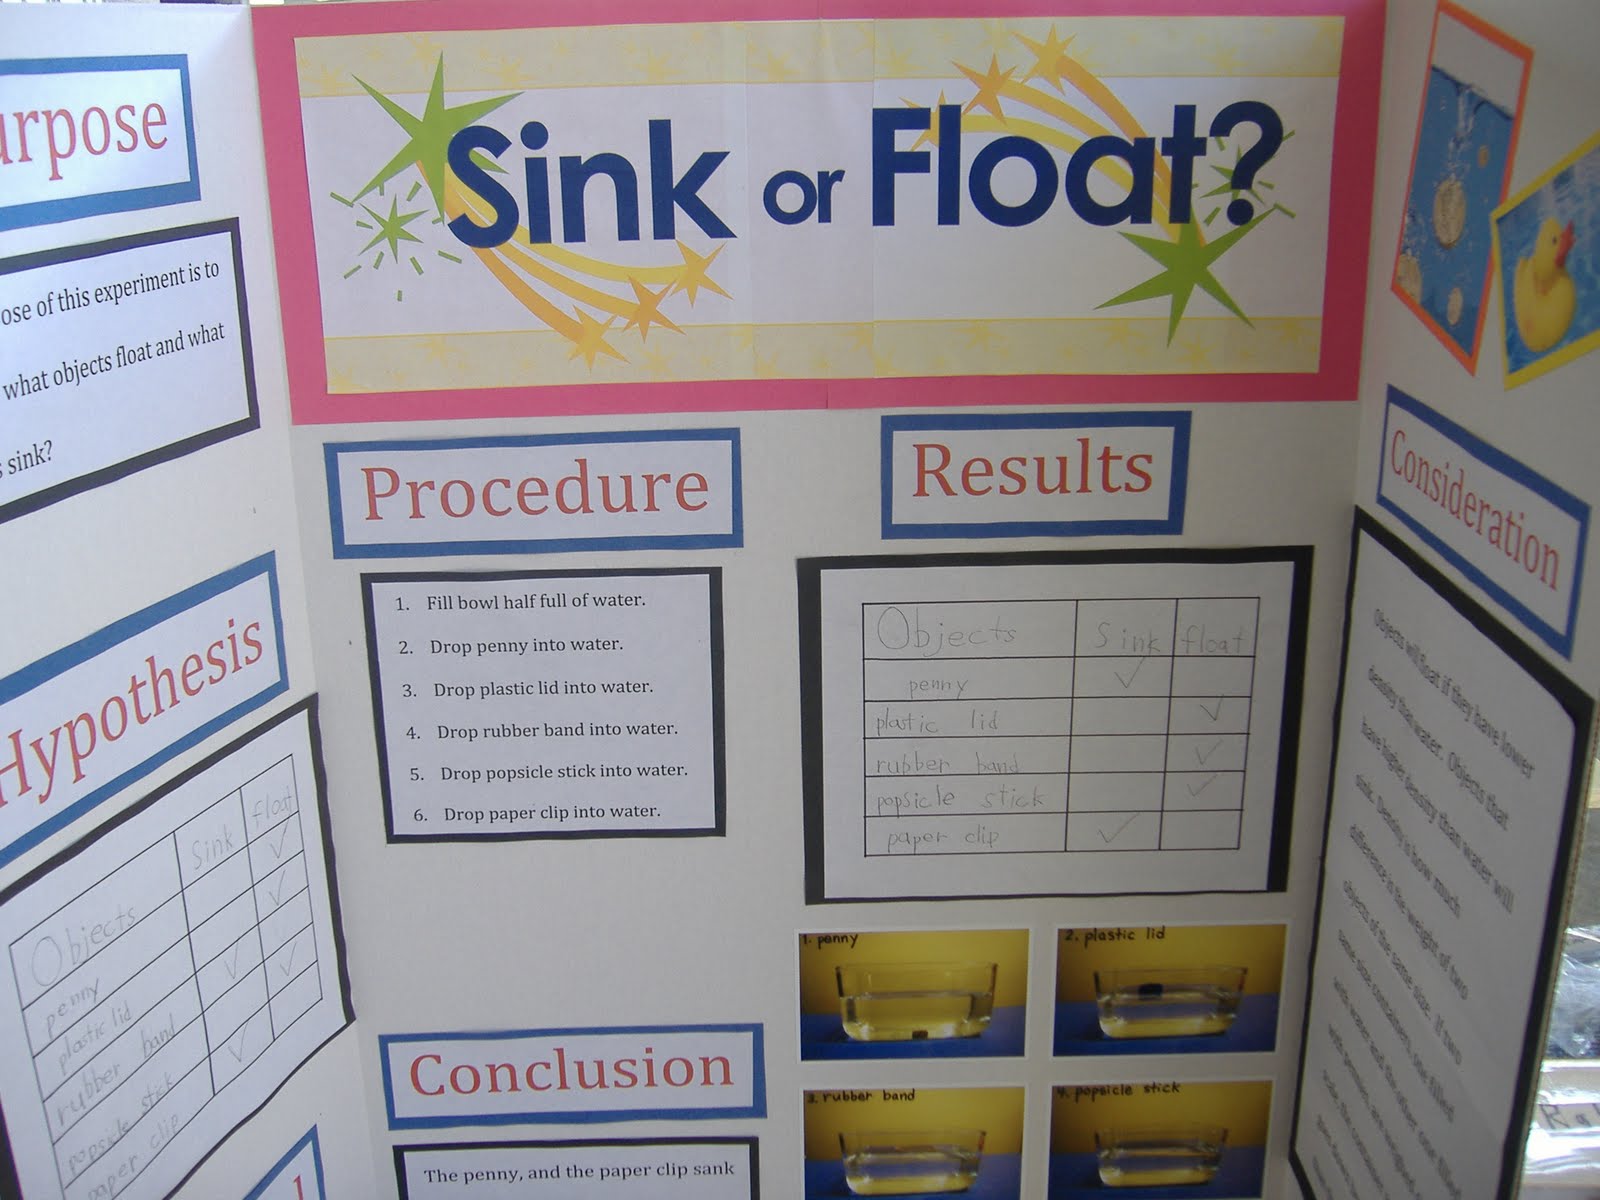 Floating Egg Science Fair Project submited images.